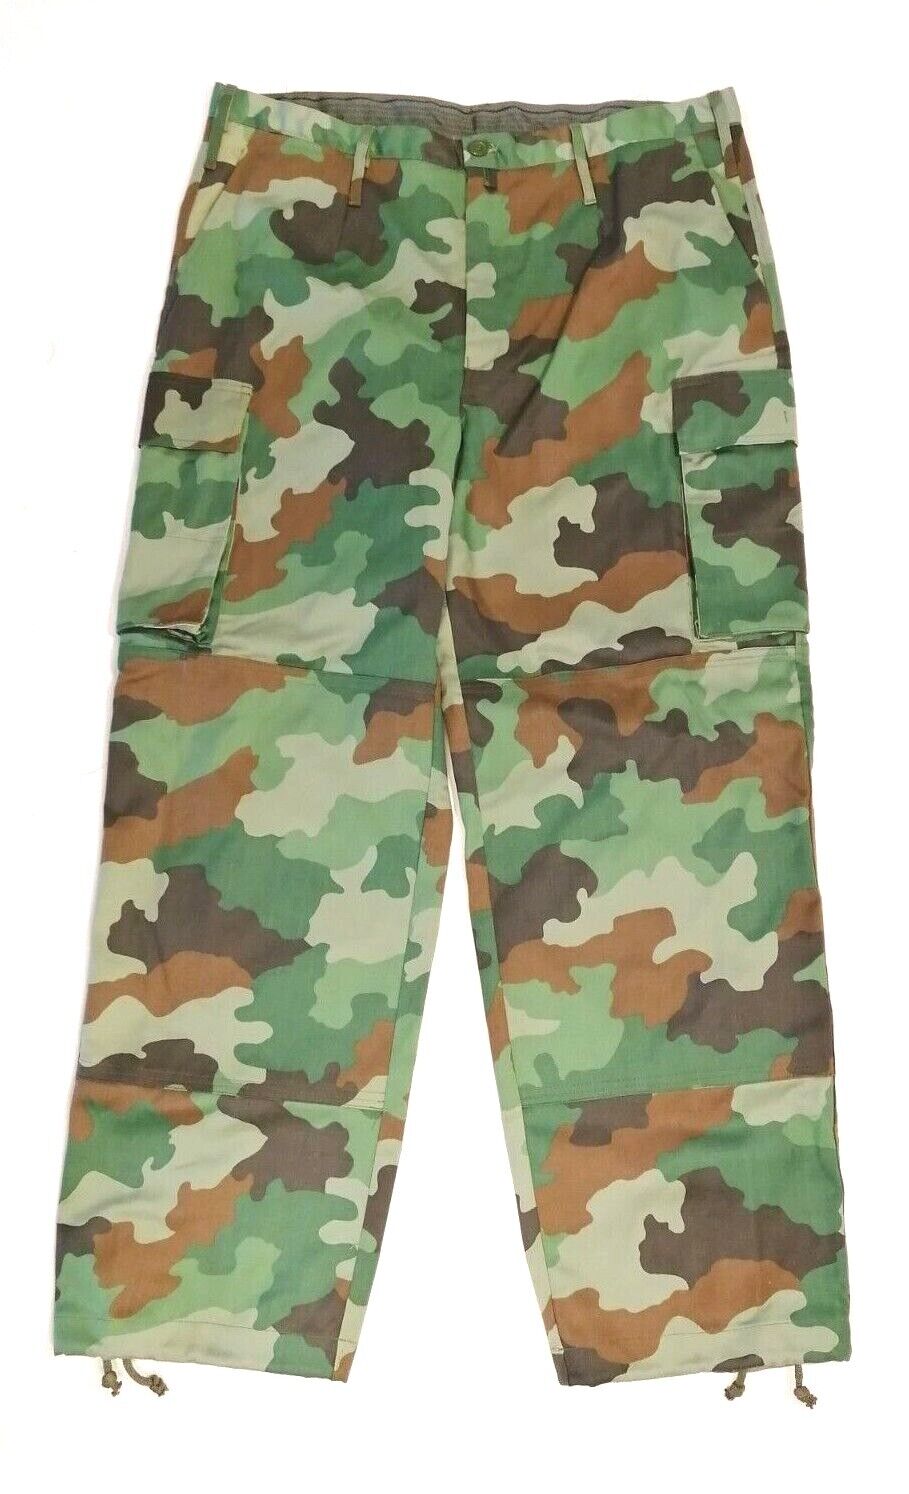 Genuine Serbian Military Pants M93 Forest Camouflage Combat Trousers size 11 XXL